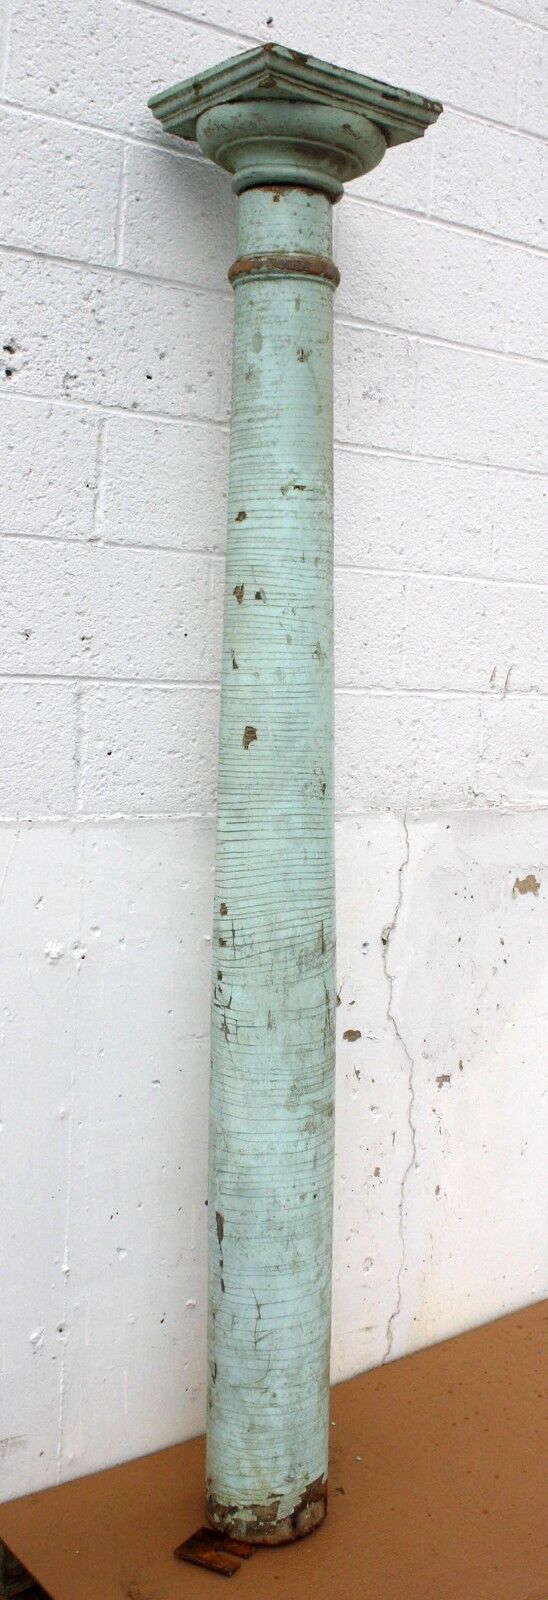 7" Antique Vintage Old Reclaimed Salvaged SOLID Wood Load Bearing Structural Porch Column Pillar Post